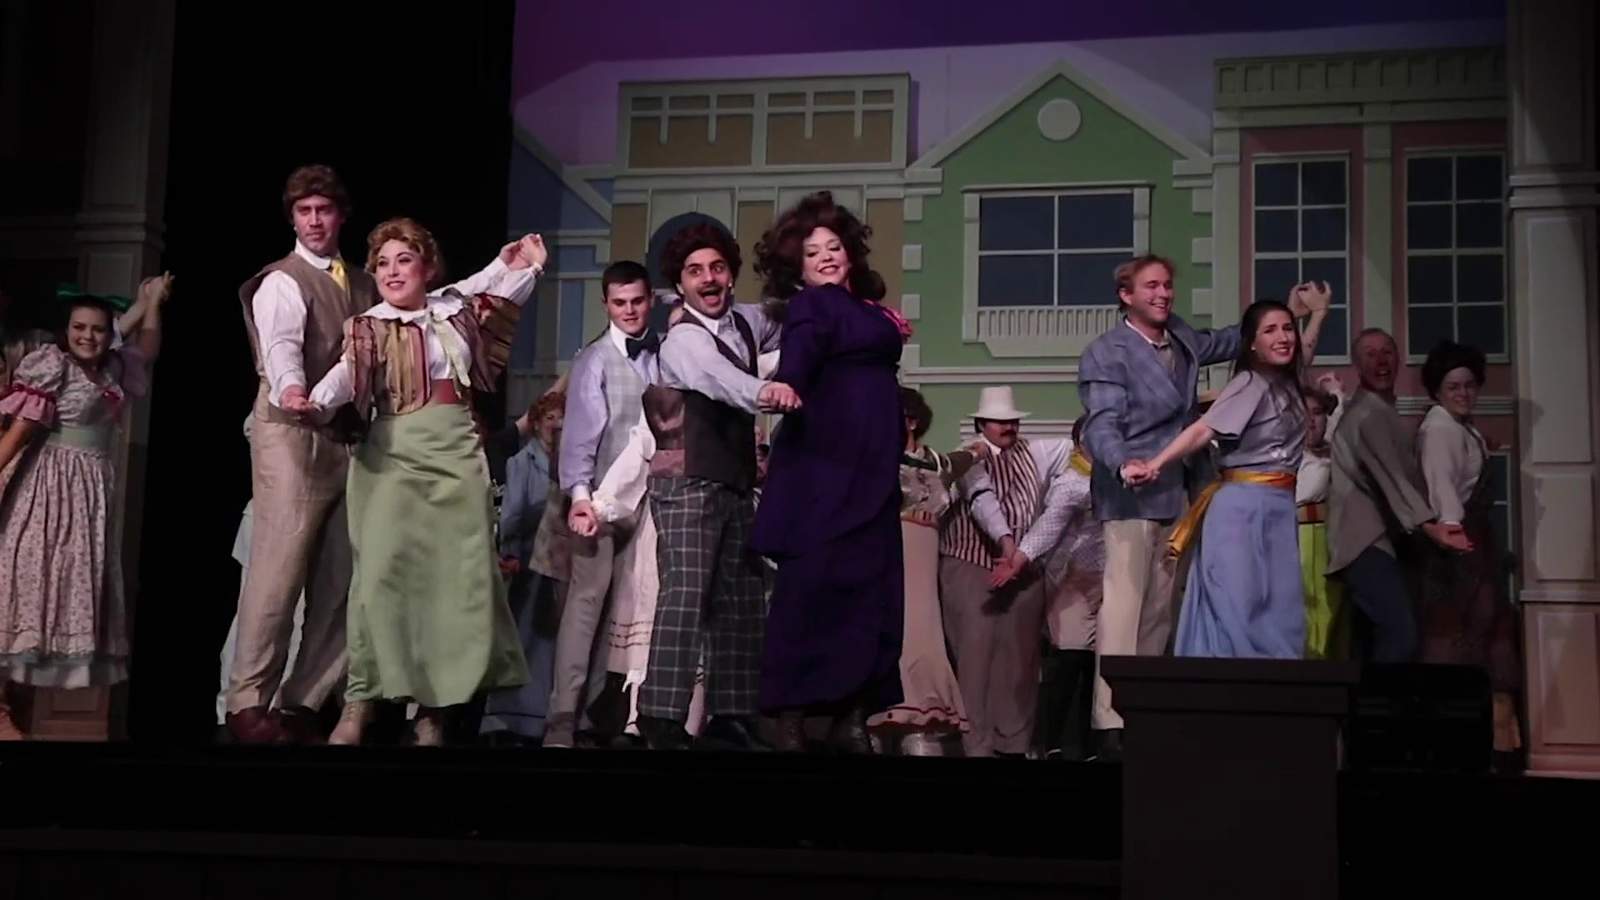 The Music Man marches into the Woodlawn Theatre